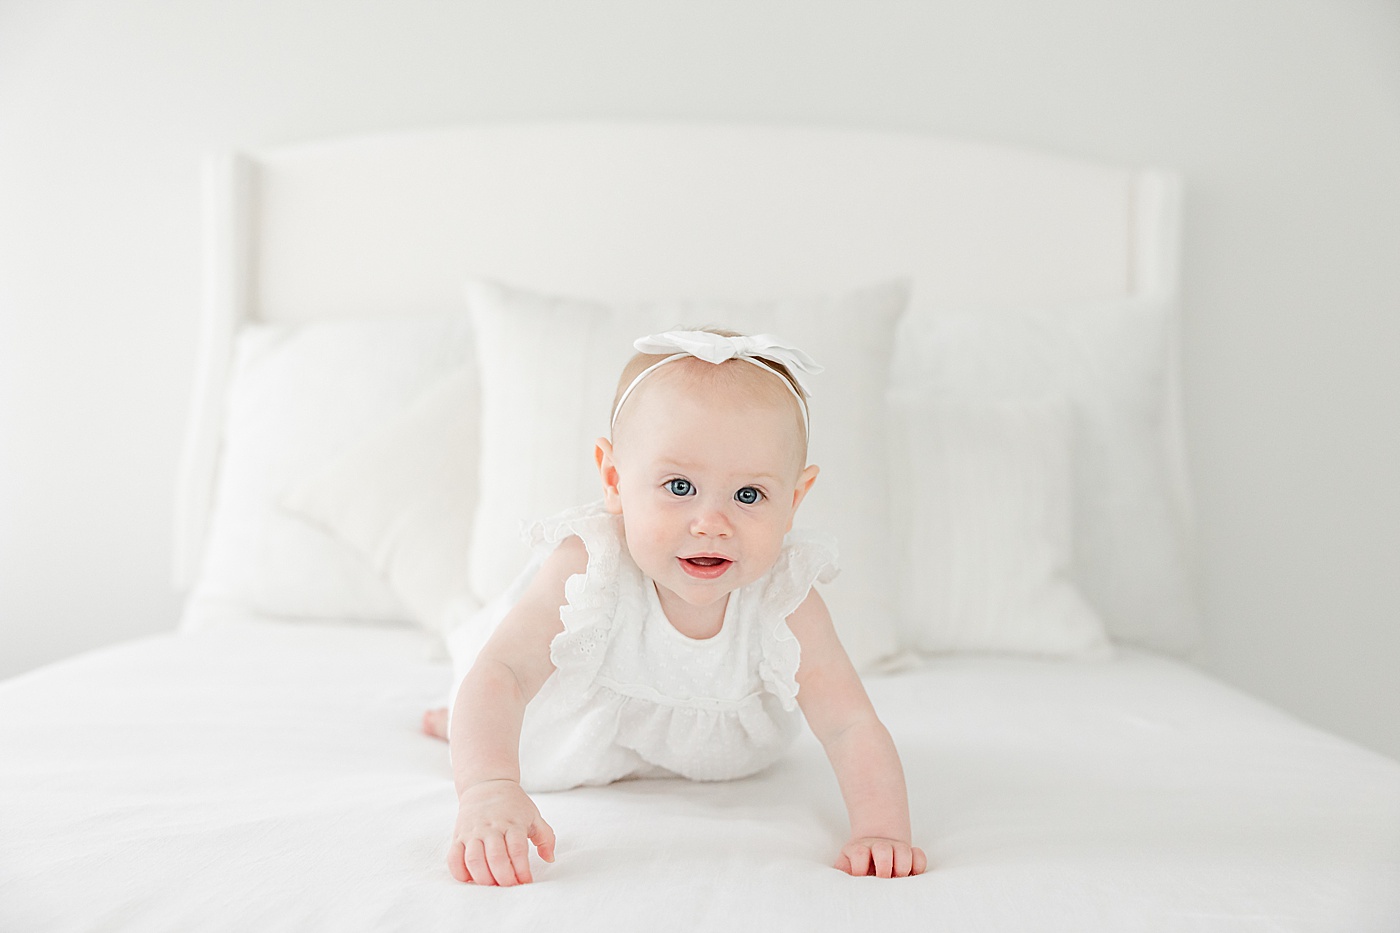 7 month old baby girl crawling on bed | Kristin Wood Photography